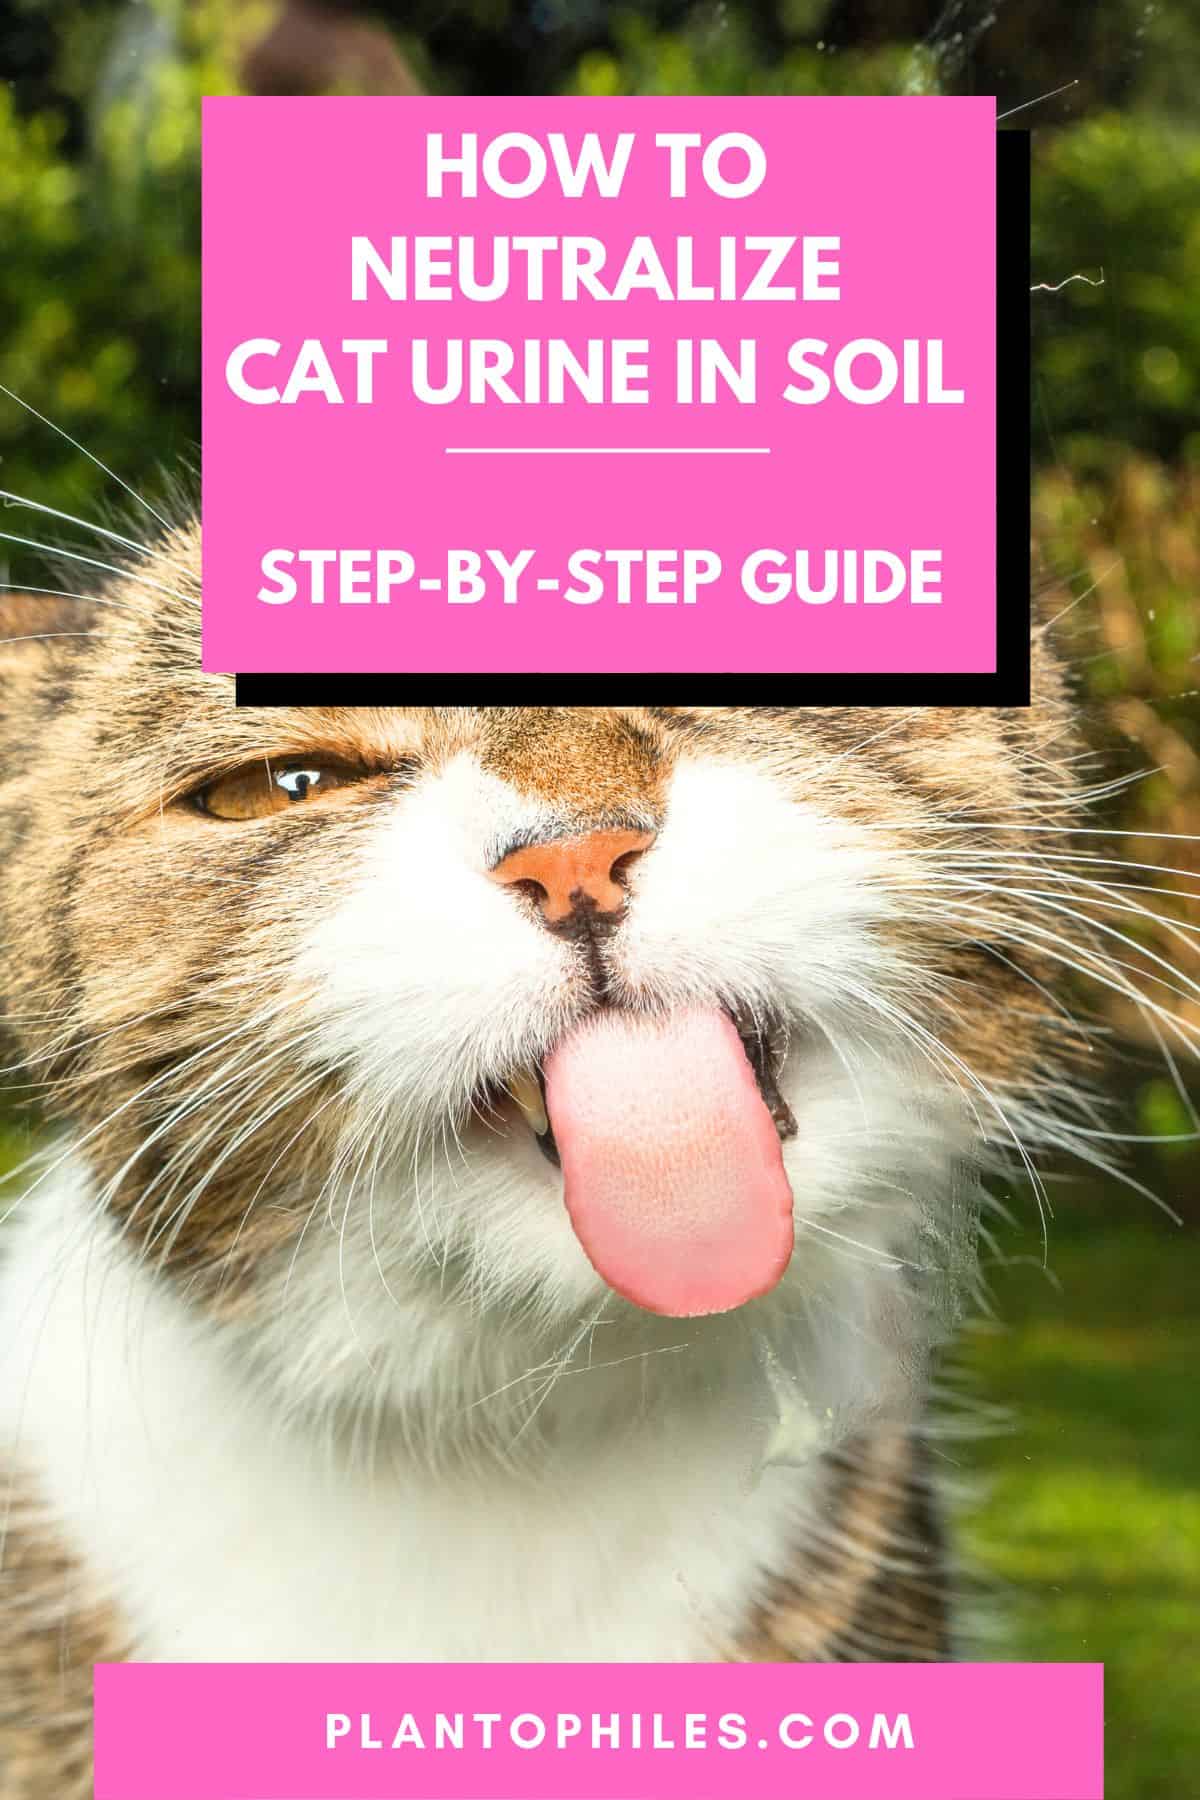 How to Neutralize Cat Urine in Soil (1)